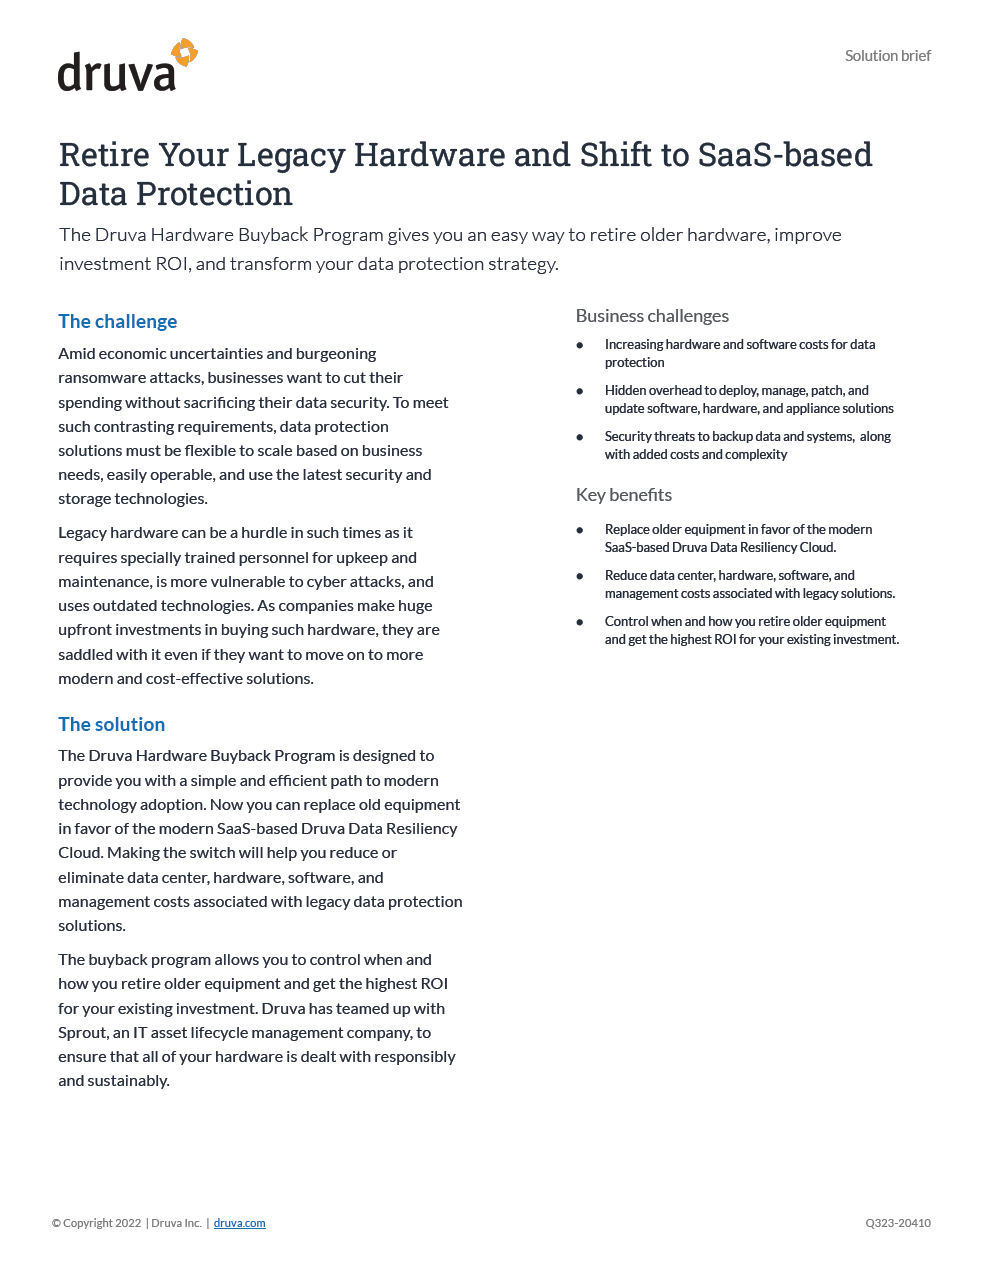 Retire Your Legacy Hardware and Shift to SaaS-based Data Protection